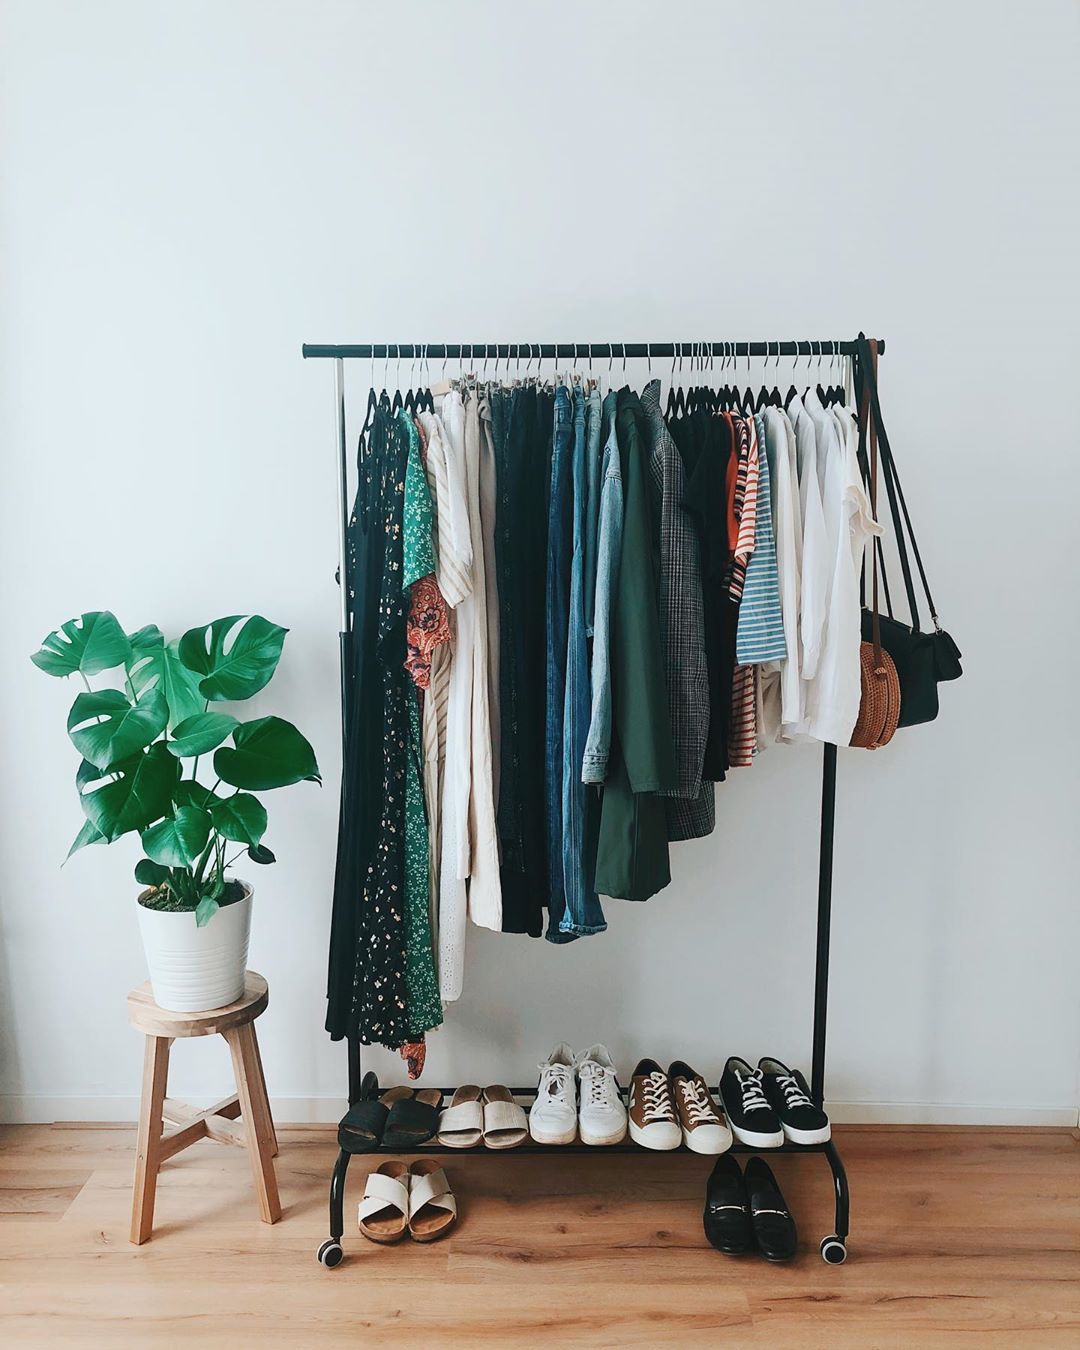 Clothes hanging on a rolling rack. Photo by Instagram user @selinasinspiration